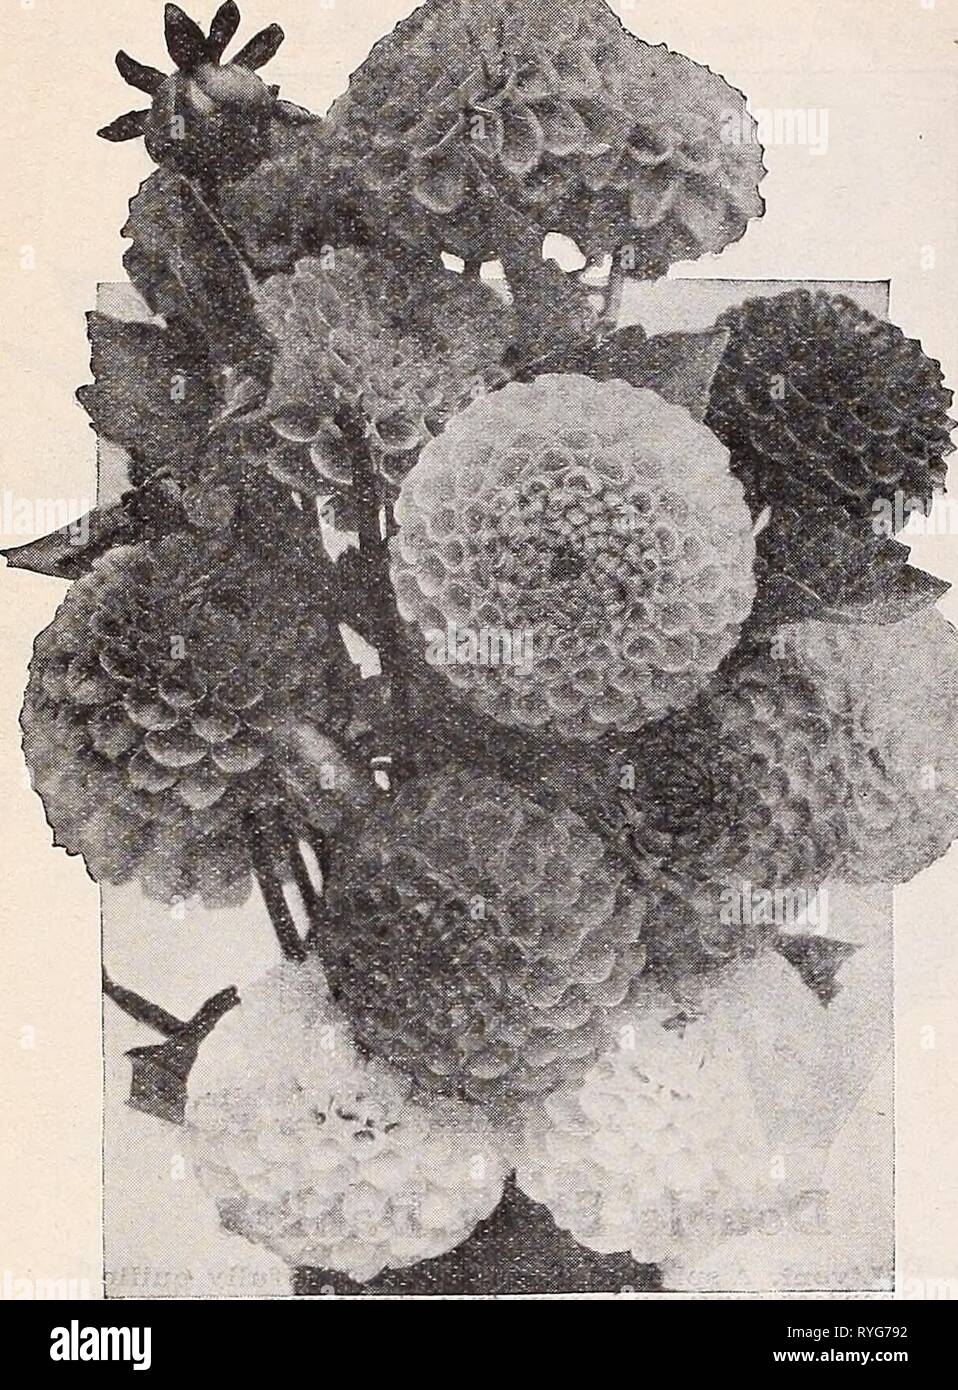 Dreer's wholesale price list for florists : flower seeds plants and bulbs vegetable and lawn grass seeds sundries  dreerswholesalep1932henr 1 Year: 1932  44 HENRY A. DREER DaMias WIf QjbES ALE, LIST    Double Pompon Dahlias Ilainty Dowble Pompon Dahlias These dainty little gems tiave in recent years gained greatly in popularity, everybody admiring them. They bloom most profusely from early in the season until frost, furnishing at all times an abundance of perfect flowers on good stems suitable for cutting for which purpose they are exceptionally -well adaptedr Almee. Miniature salmon shaded bu Stock Photo